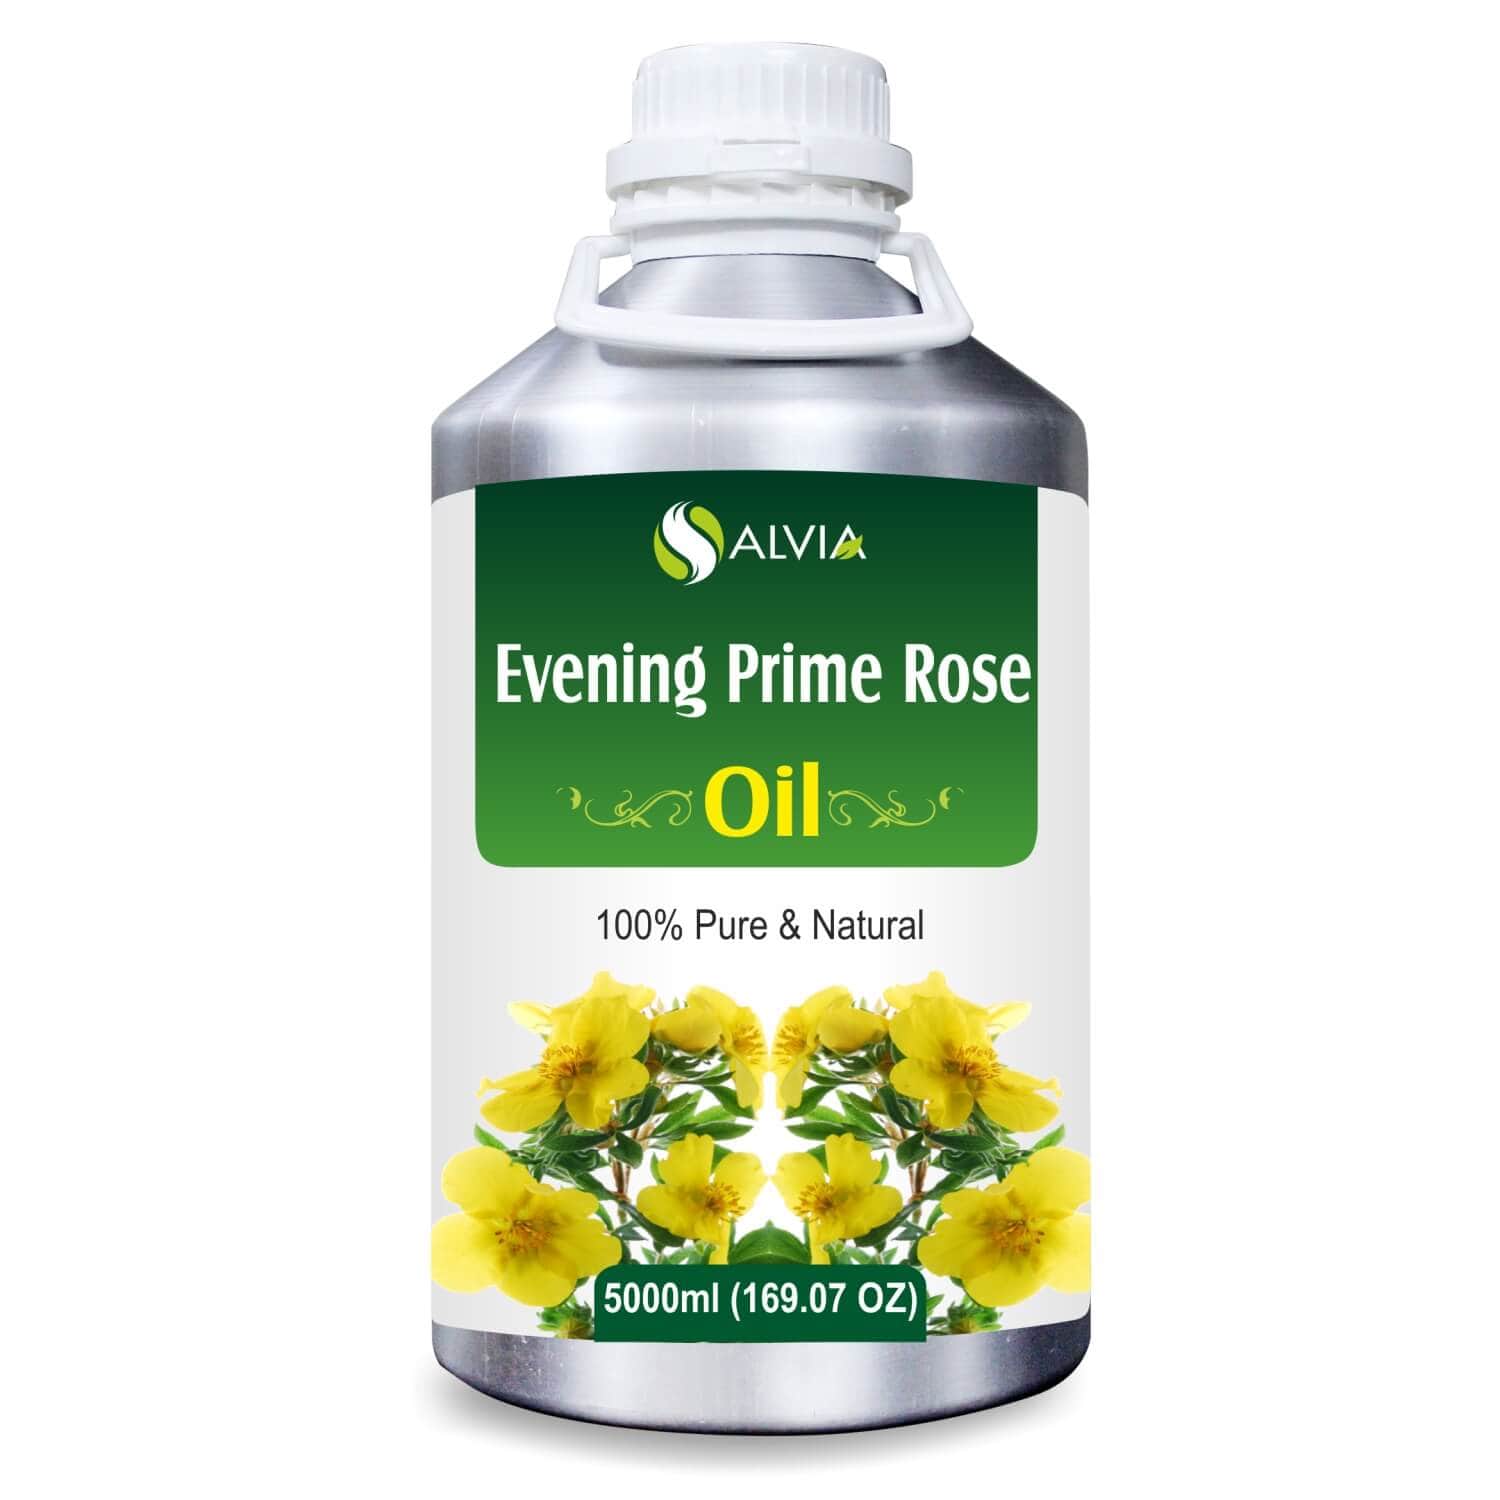 Salvia Natural Carrier Oils 5000ml Evening Prime Rose (Oenothera) 100% Natural Pure Carrier Oil Reduces Acne, Clears Complexion, Maintains Skin’s Elasticity, Excellent Moisturing